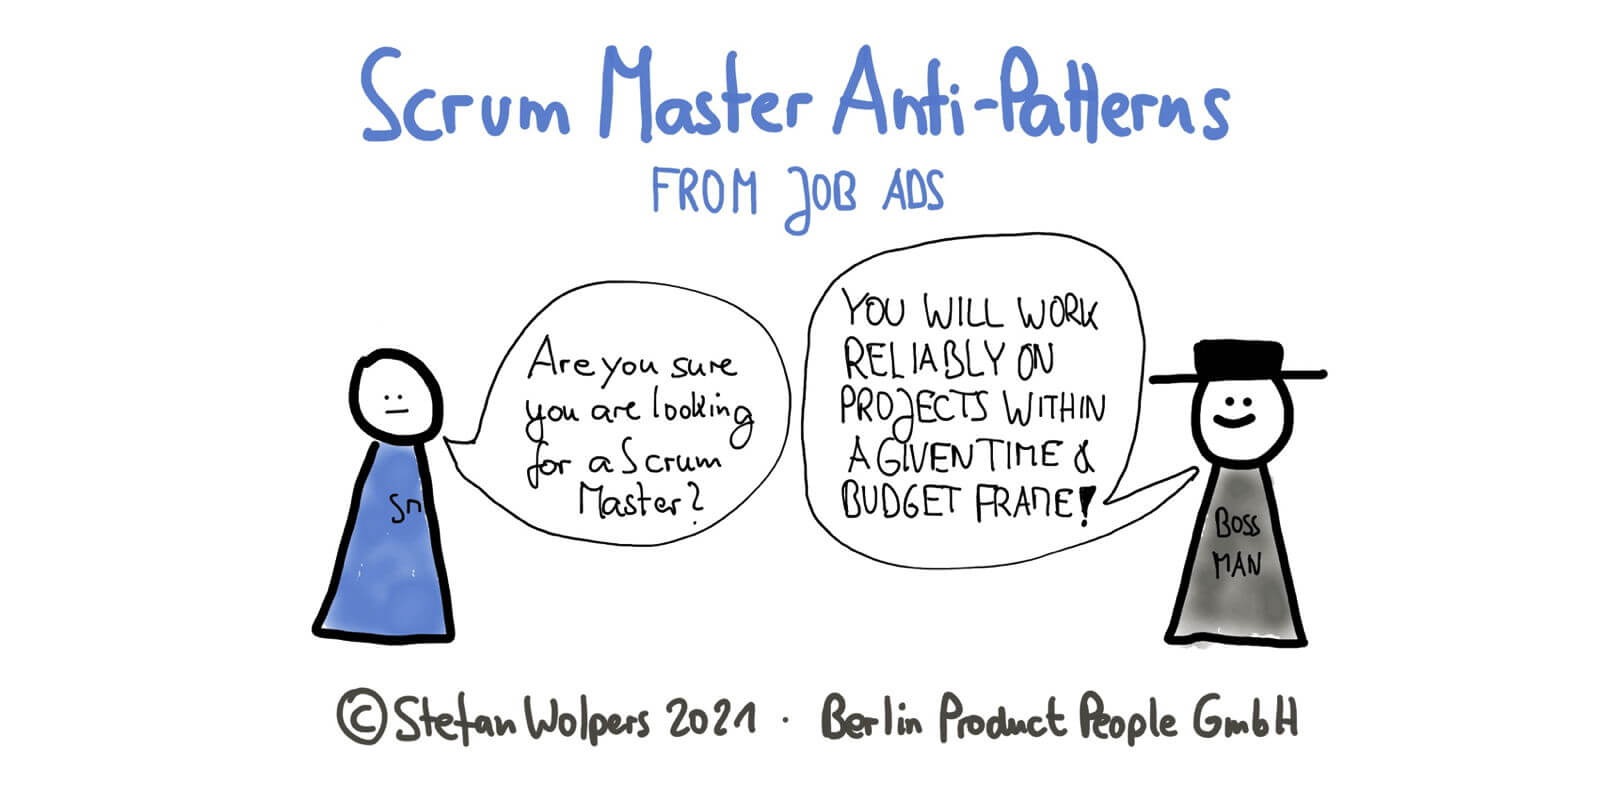 22 Scrum Master Anti-Patterns from Job Ads: From Funny to What the Heck? Berlin Product People GmbH